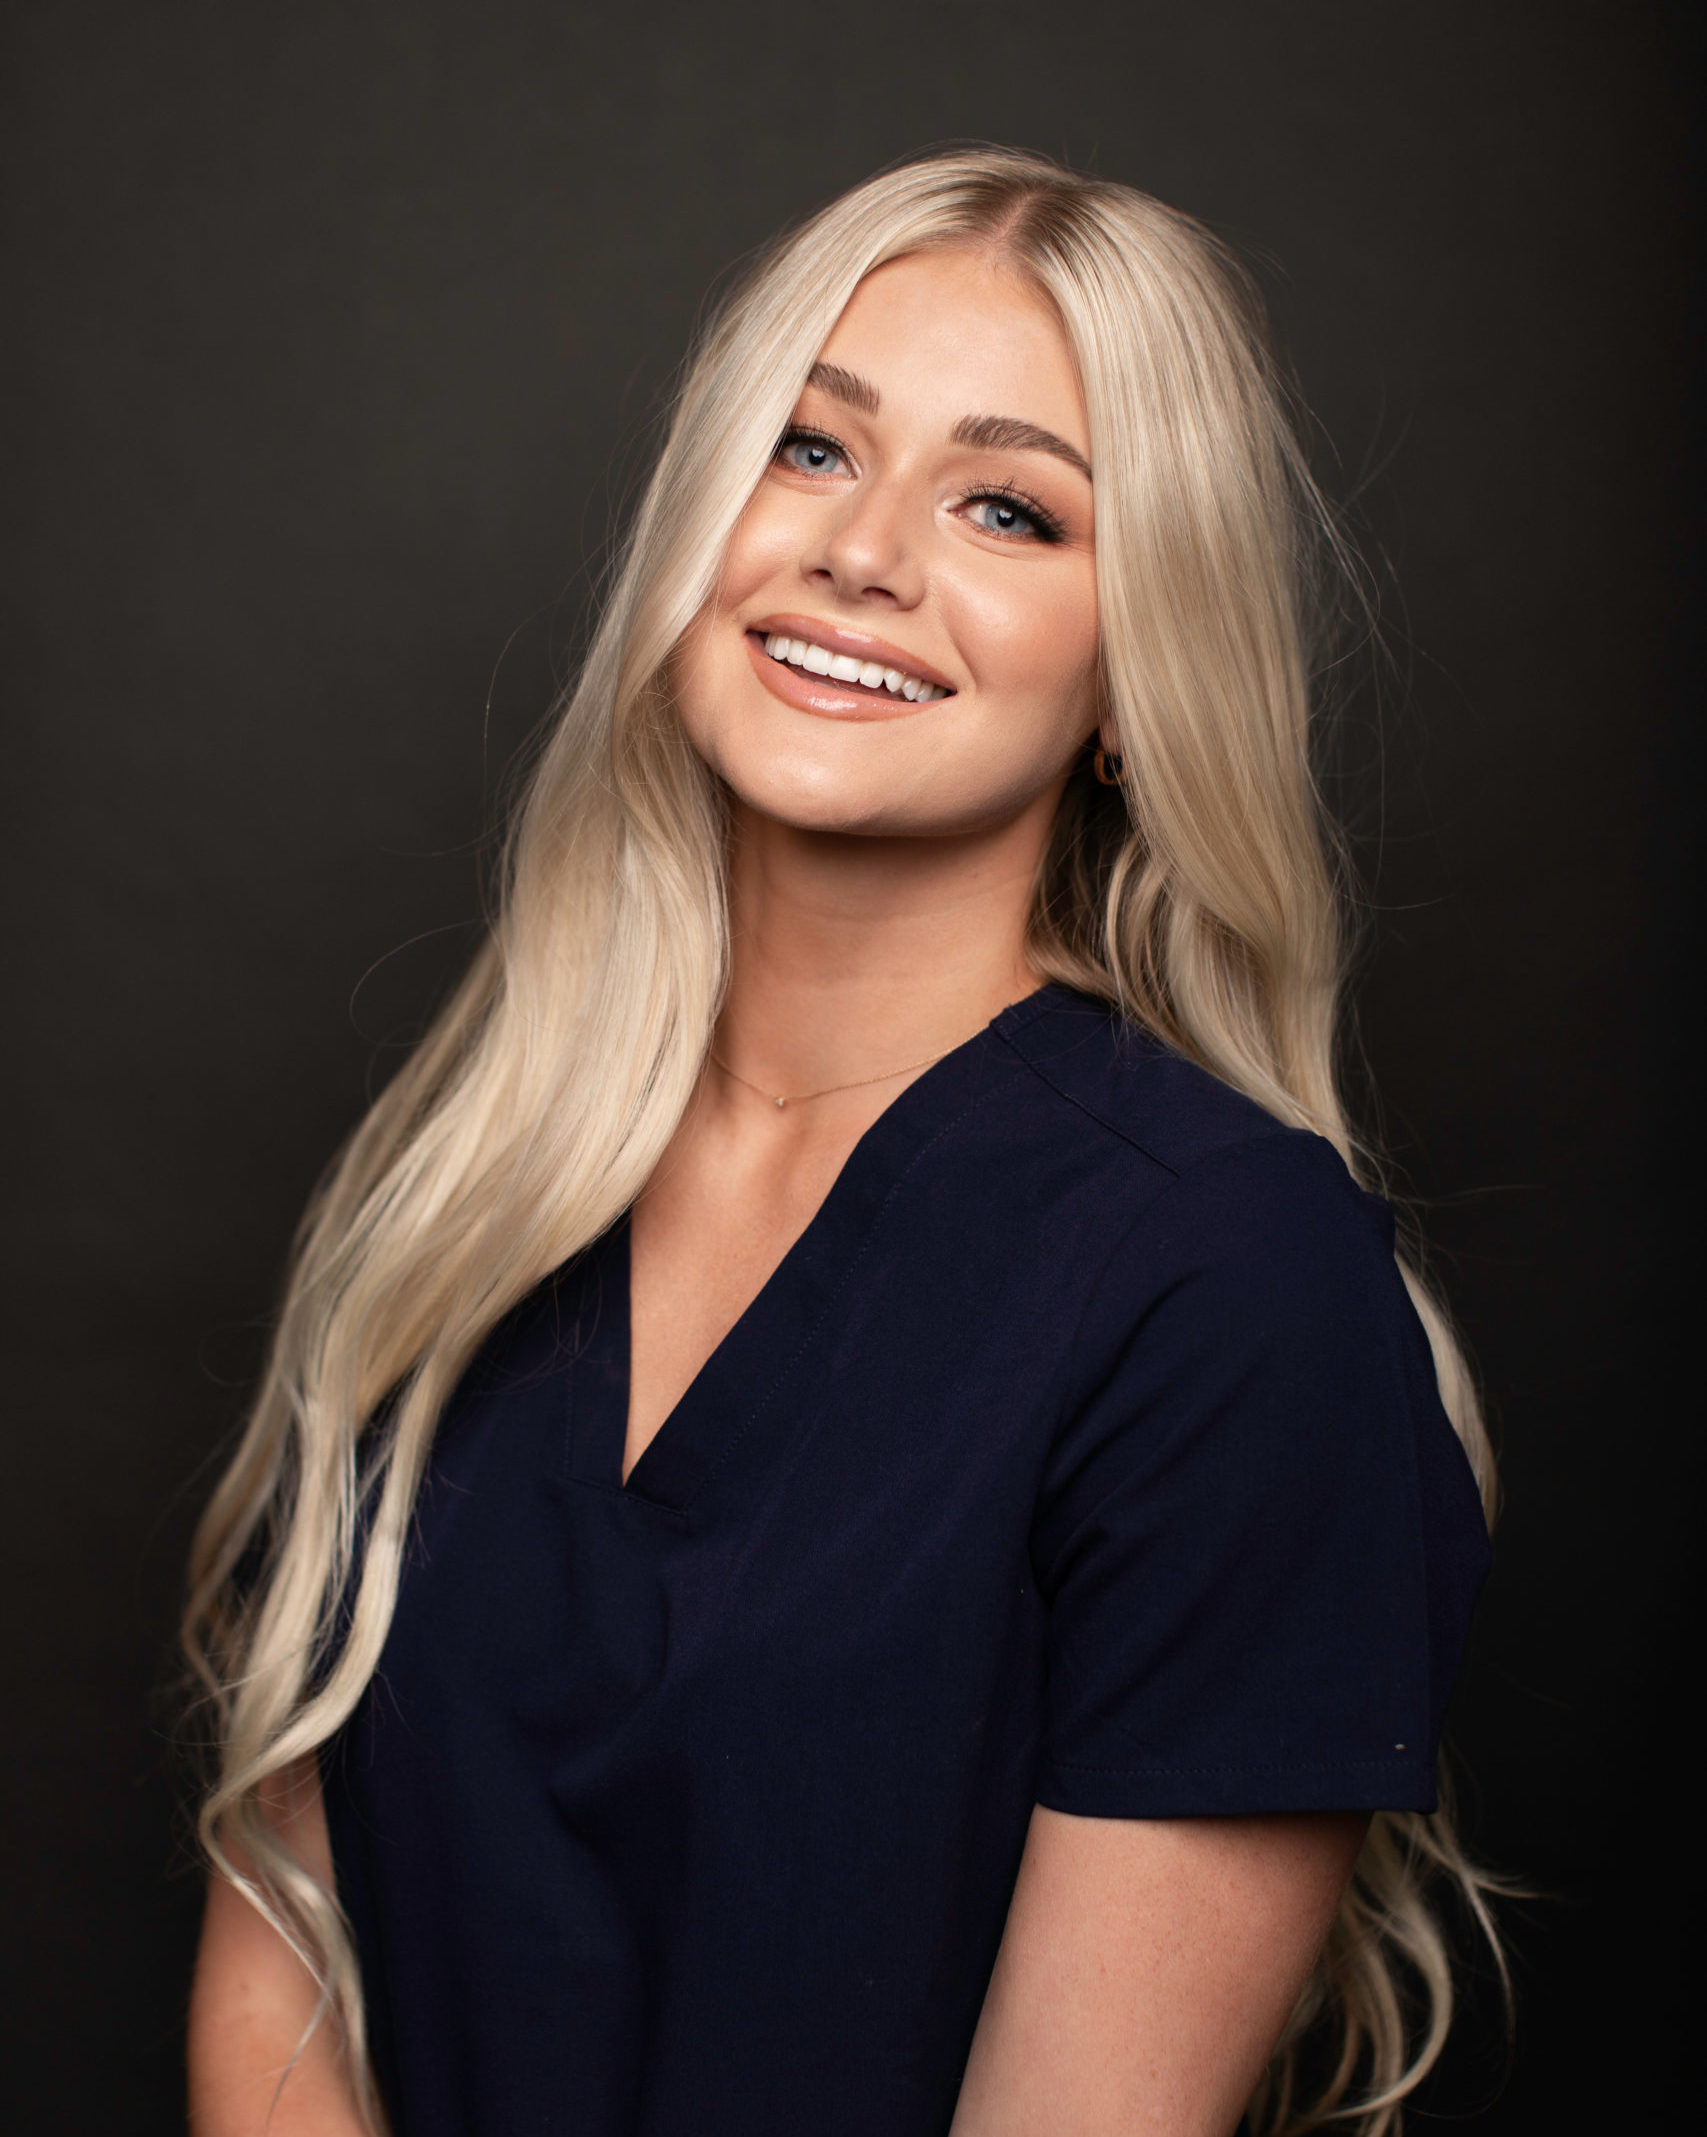 Brynley Arnold who is a young blonde Nurse in scrubs who is a Utah Injections Instructor